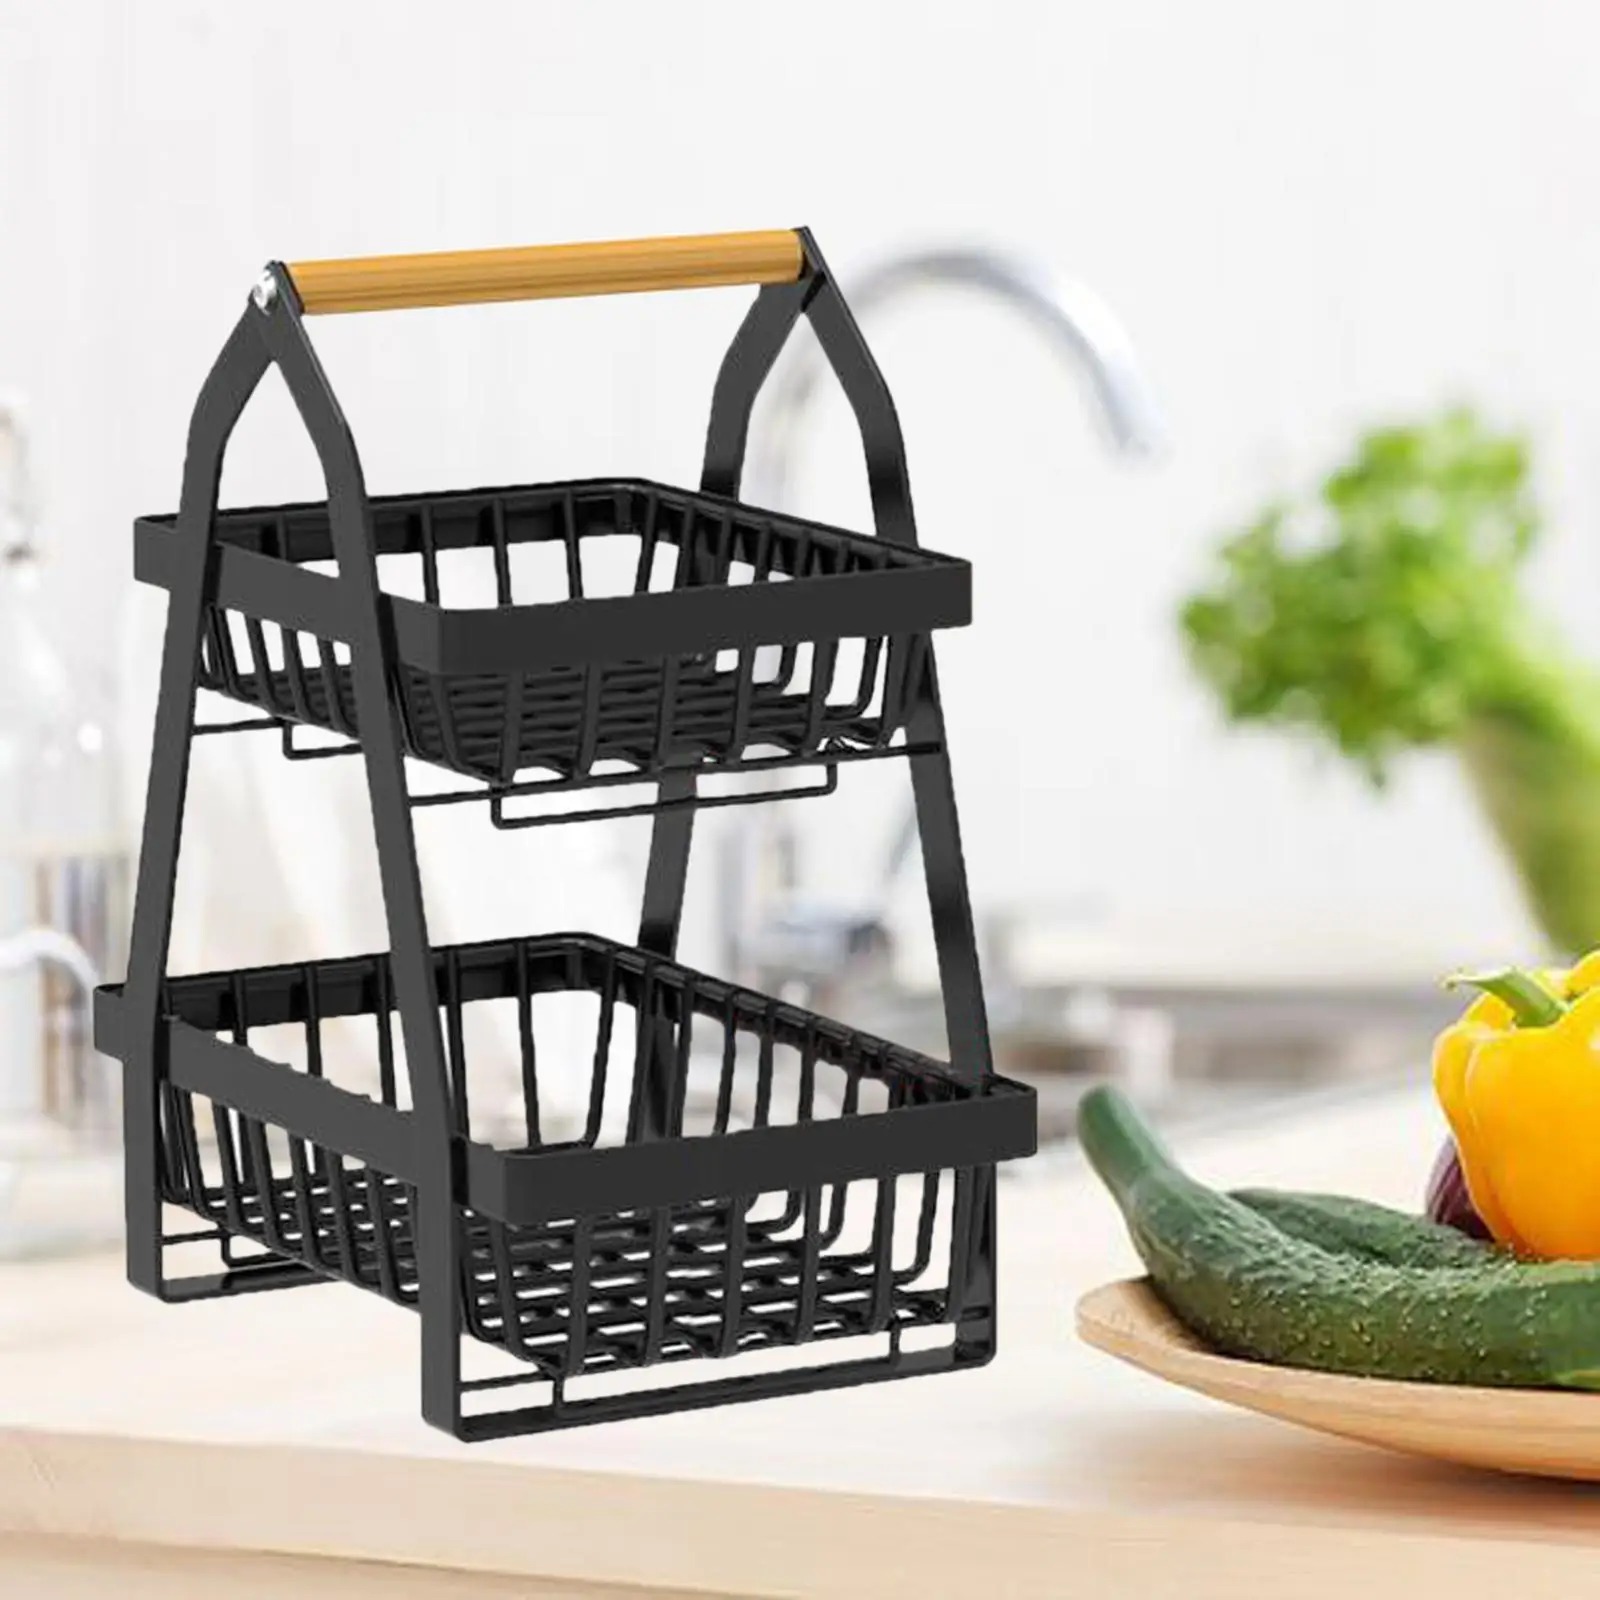 Bread Vegetable Farmhouse Fruit Basket Bowl Stand with Wooden Handle Detachable Metal Wire Basket for Countertop Dining Room